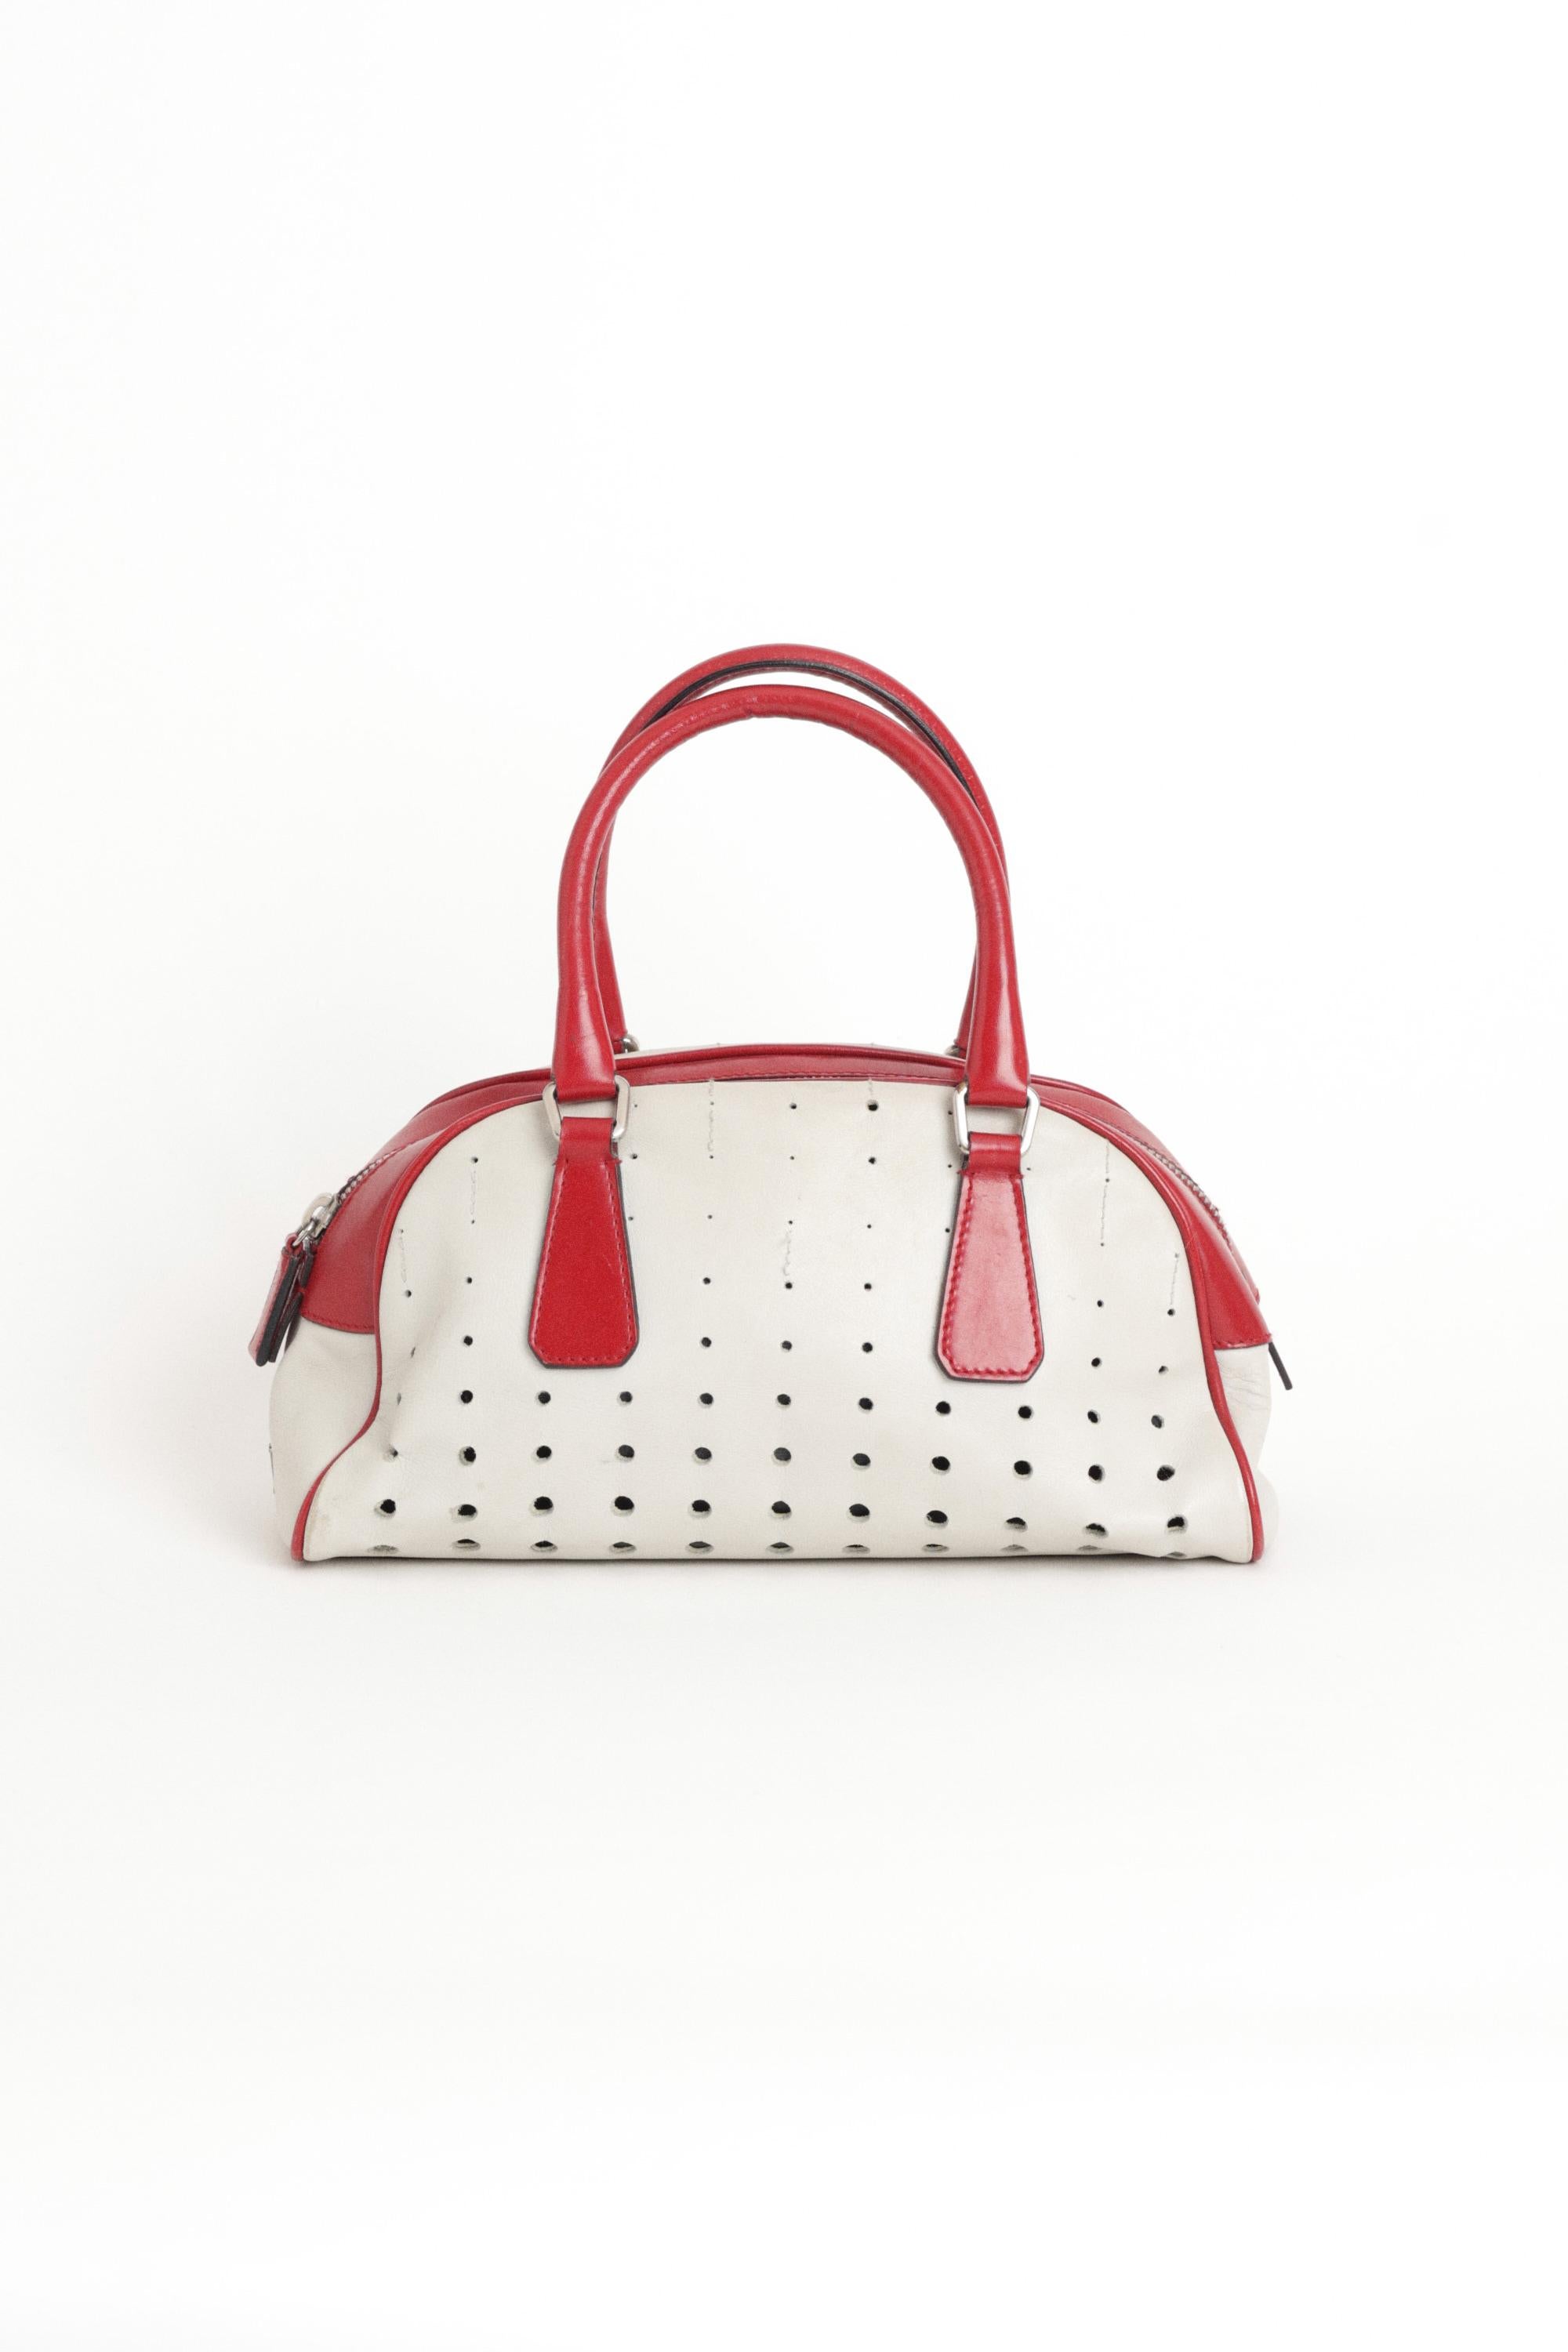 Prada 2000’s collectible red and white bowling bag. Features perforated design, interior zipped pocket and zip closure. In good vintage condition, the lining is coming away from the inside.  Has been named one of the top ten most iconic handbags